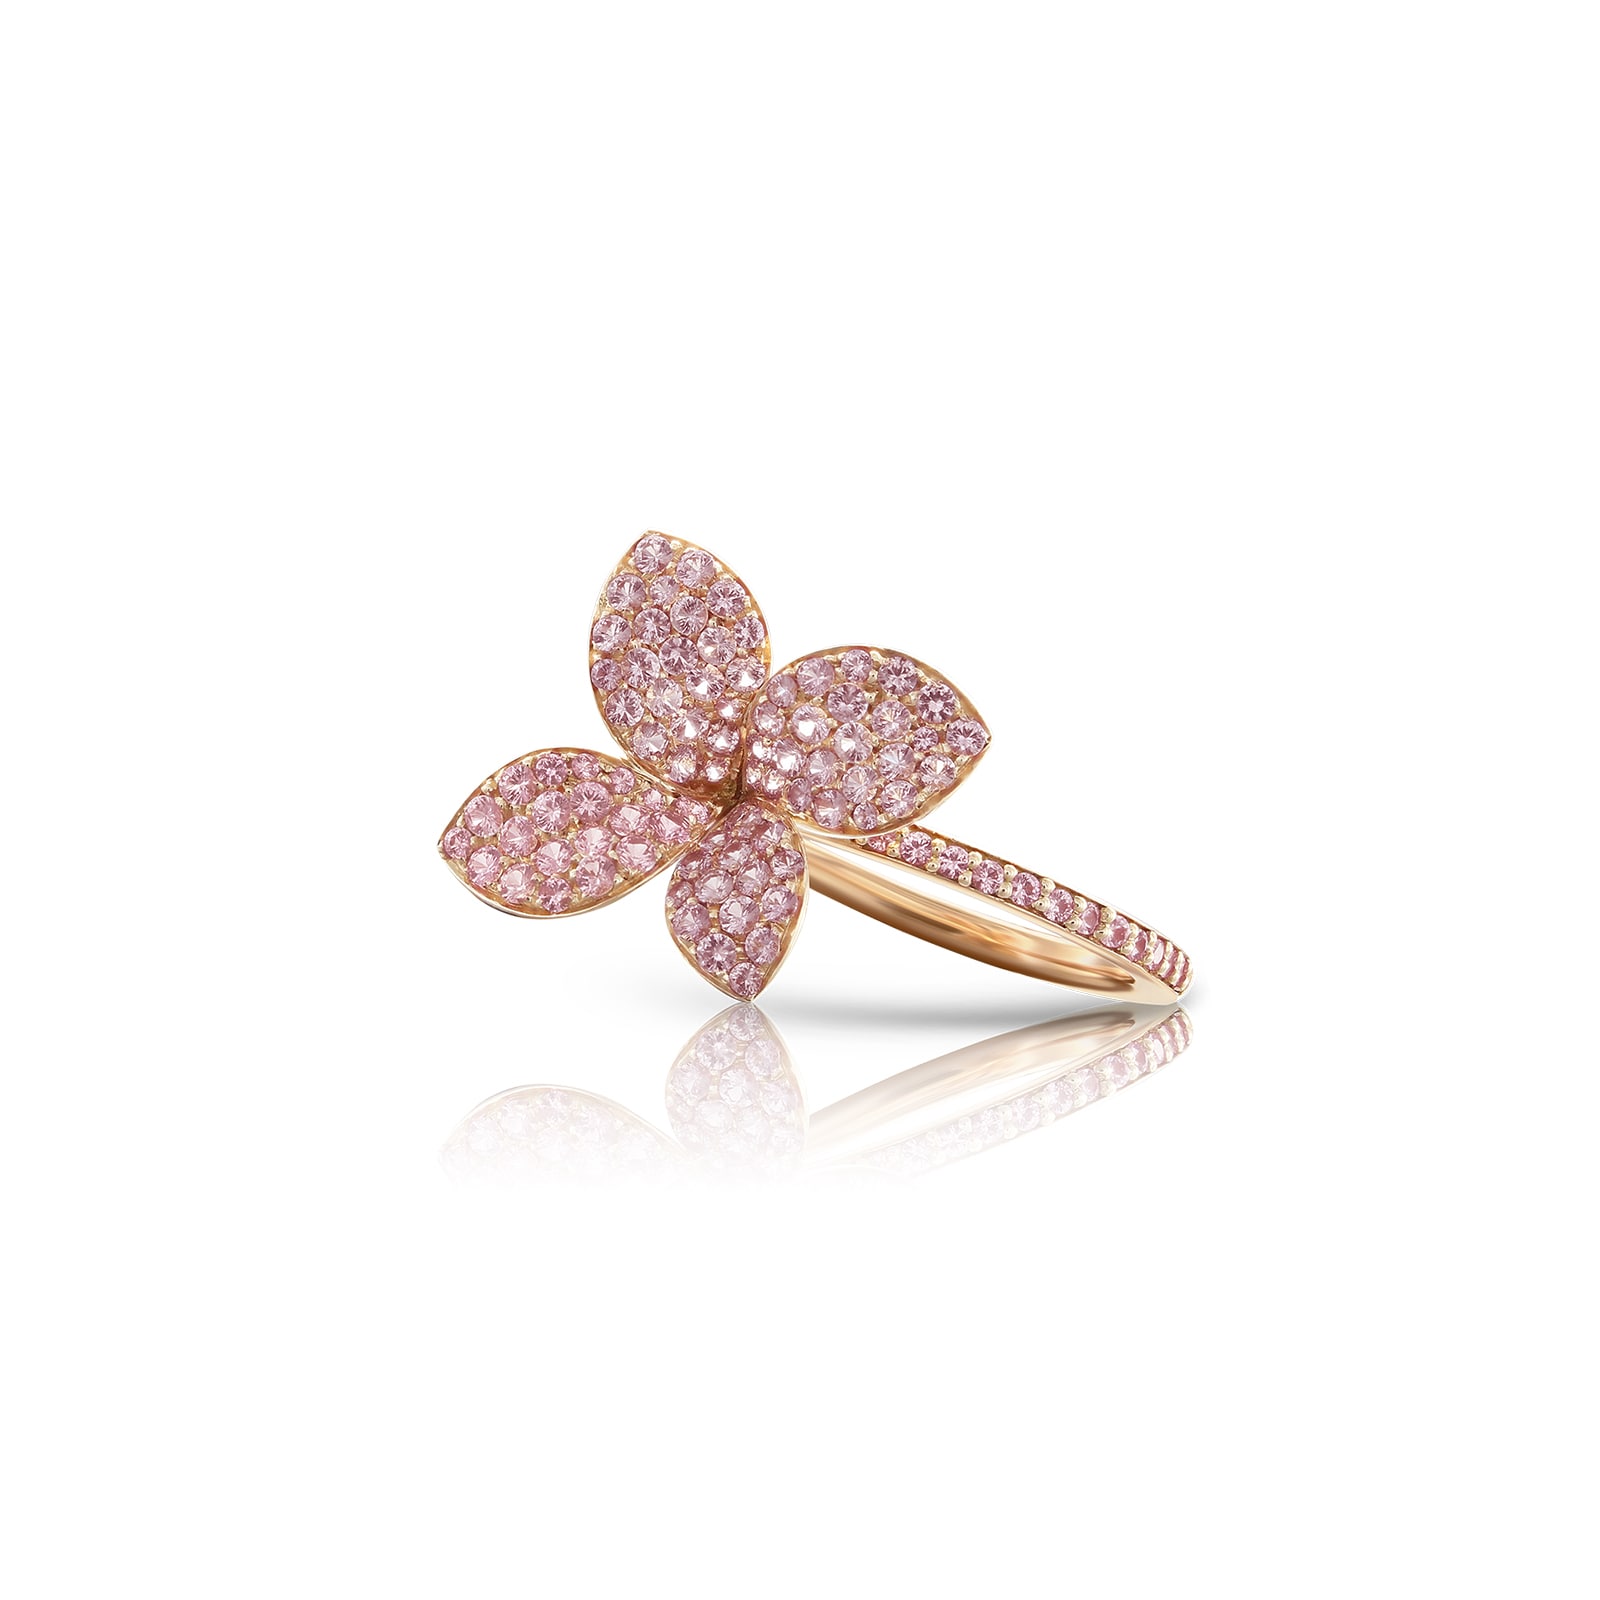 petit garden ring in 18ct rose gold with pink sapphires - ring size n